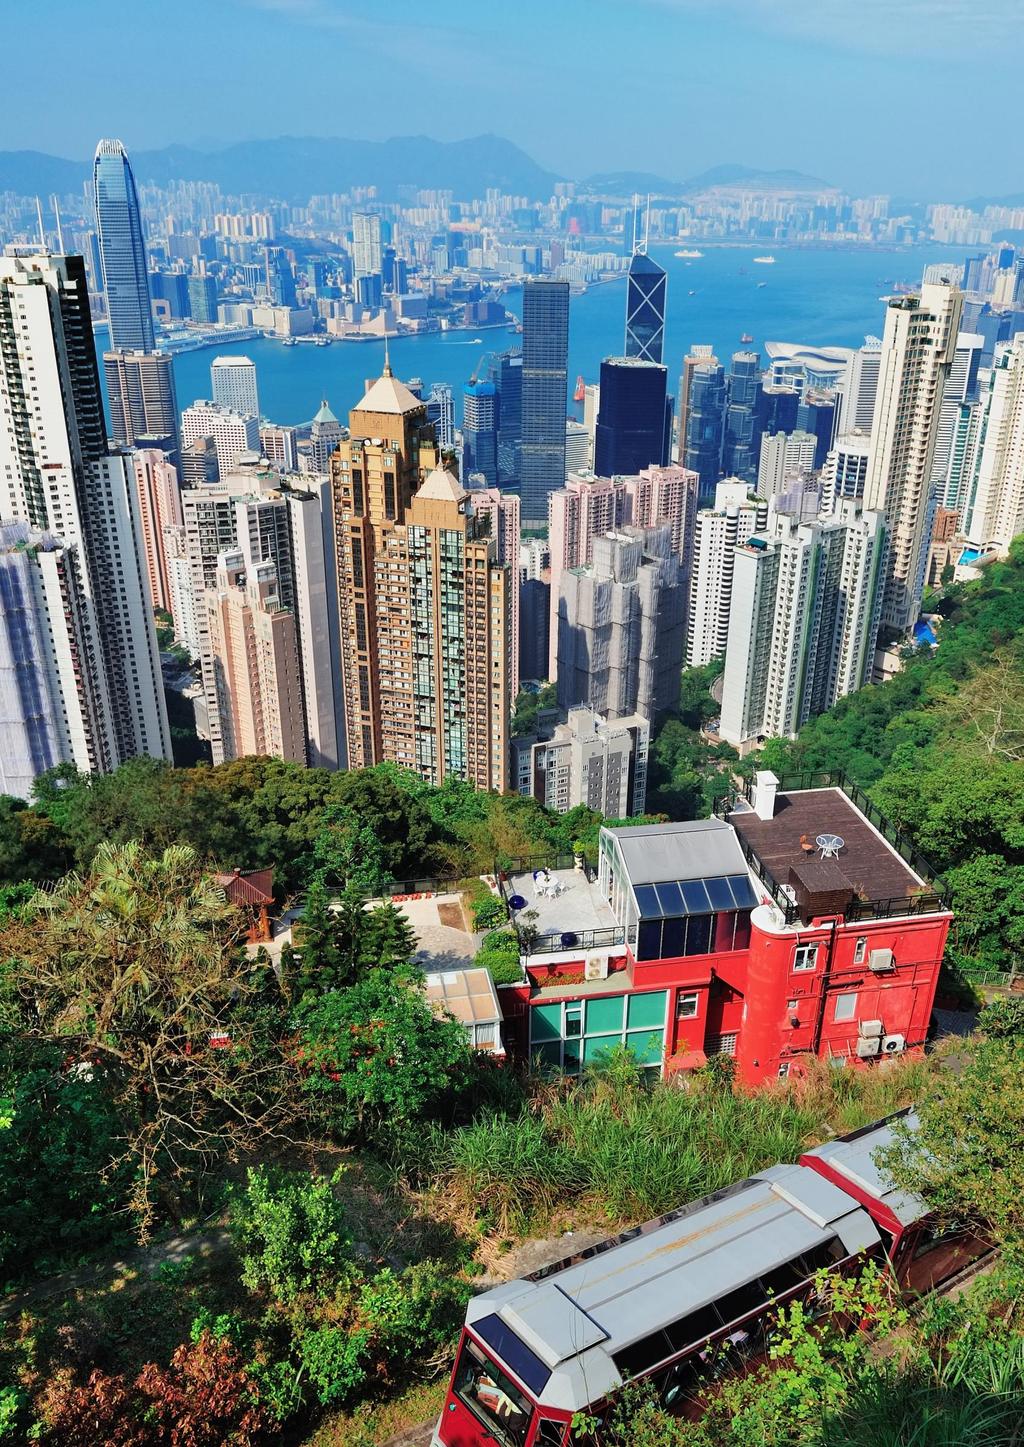 Research August 2013 REVIEW AND COMMENTARY ON HONG KONG'S PROPERTY MARKET Office s sustained across all major business districts